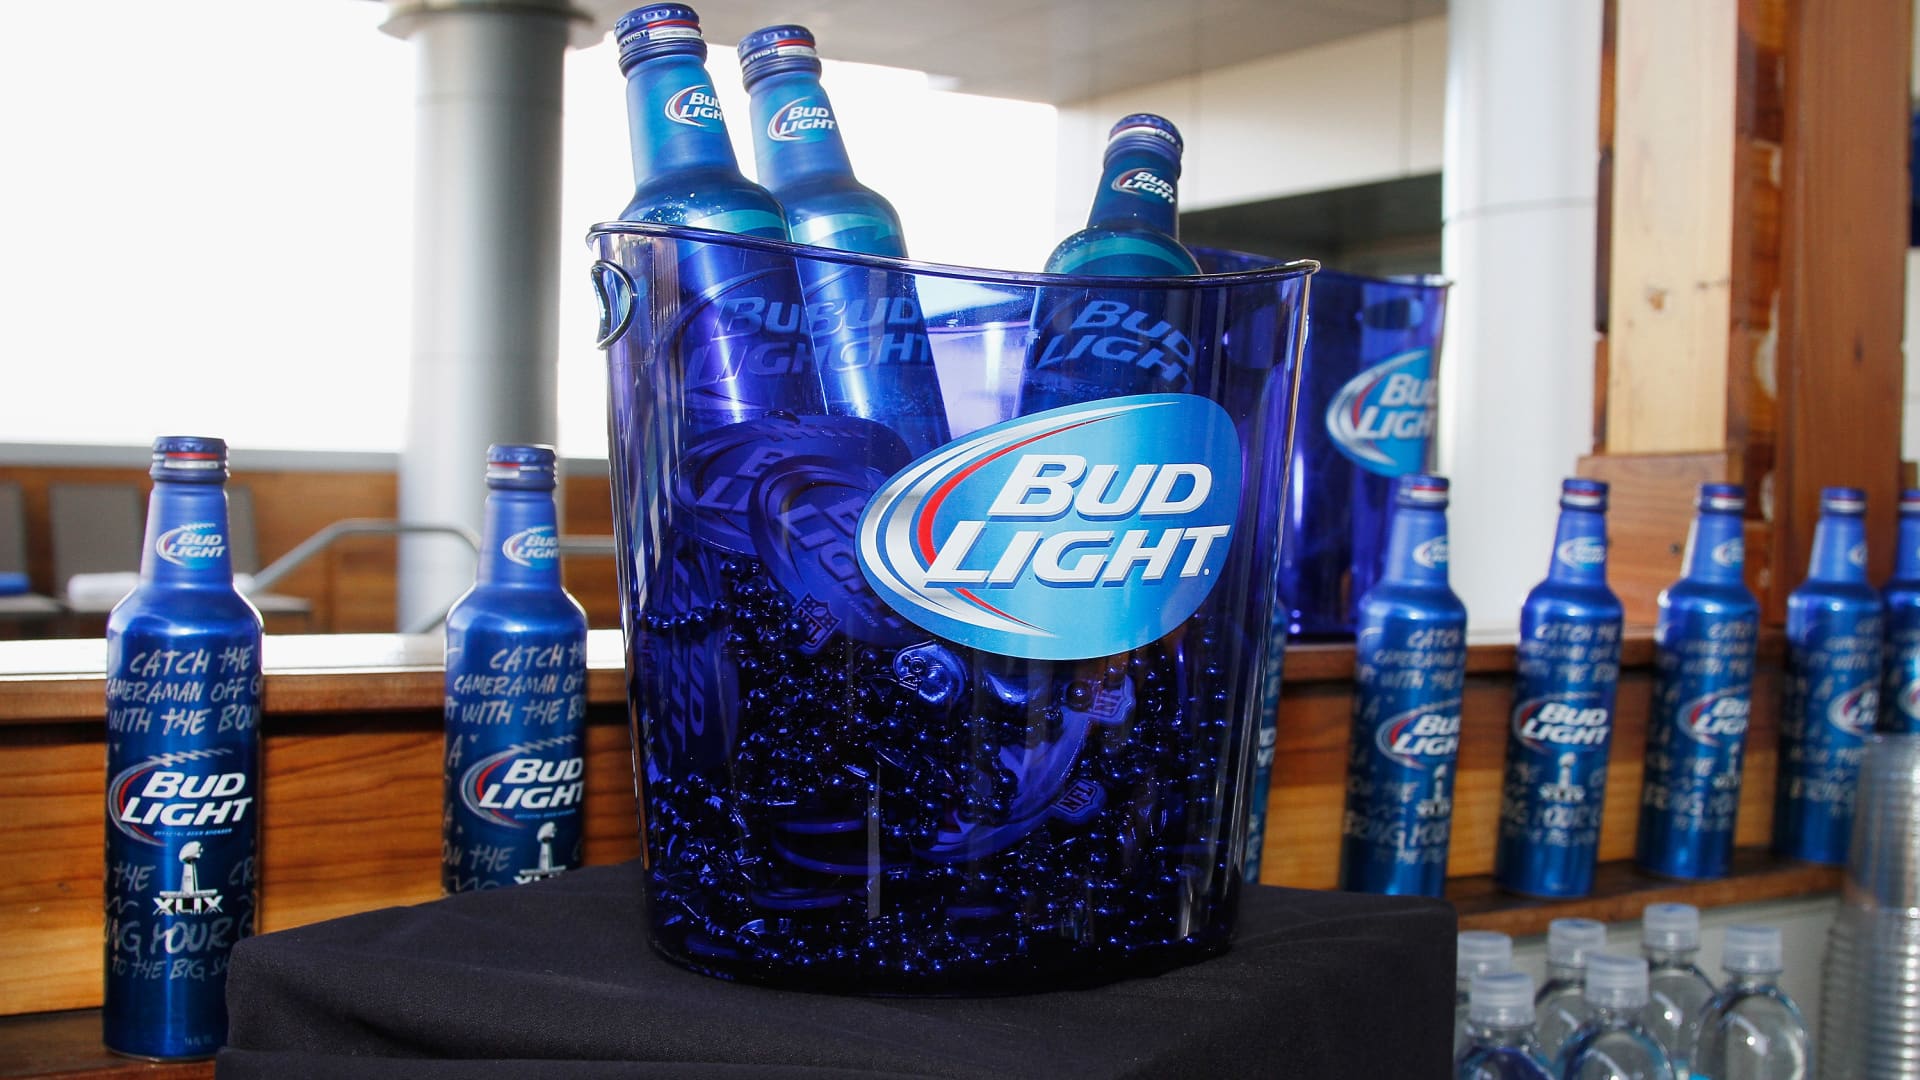 At Cannes Lions ad festival, all the talk is about Bud Light’s fiasco